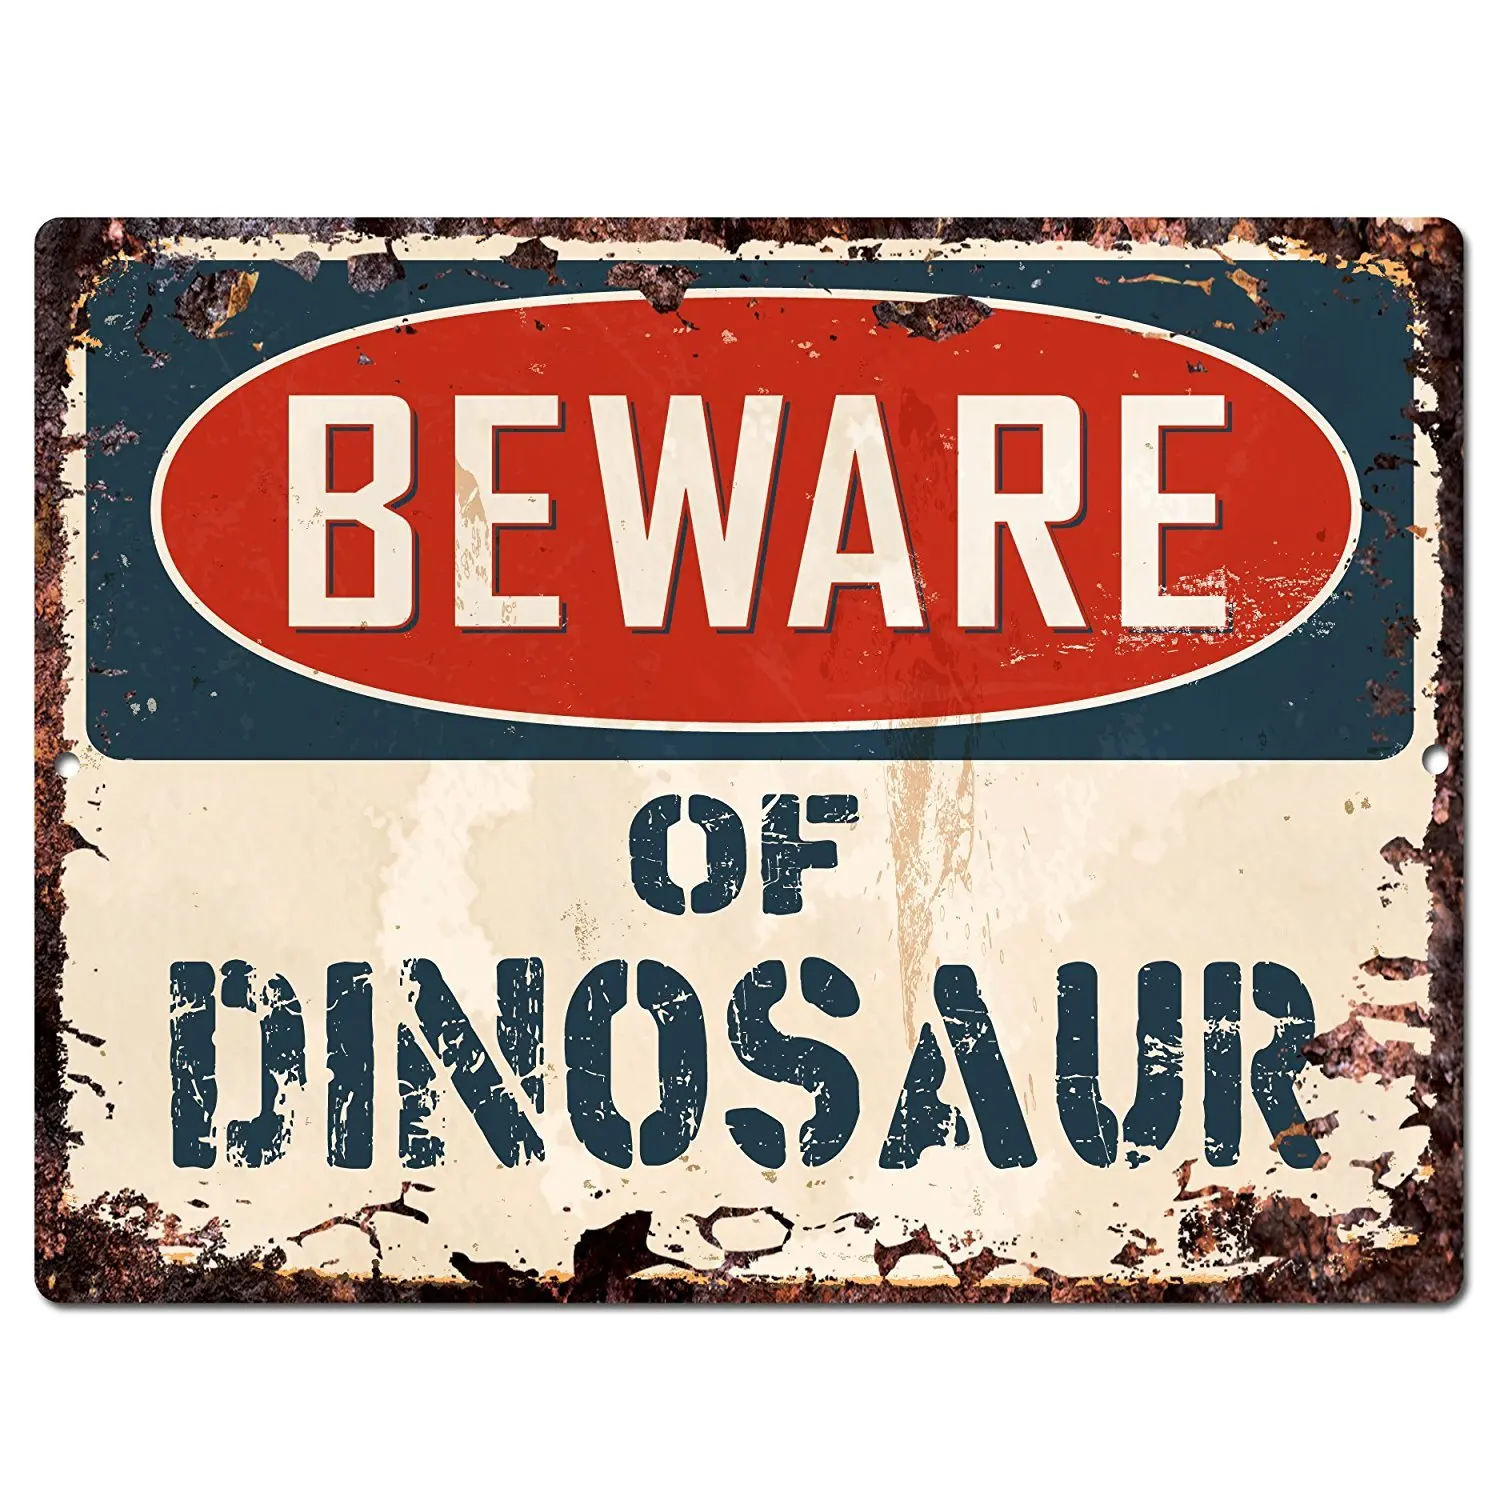 

Beware of Dinosaur Chic Tin Sign Vintage Retro Rustic 8"x 12" Inch Metal Plate Store Home Room Wall Decor Gift Metal Plaques